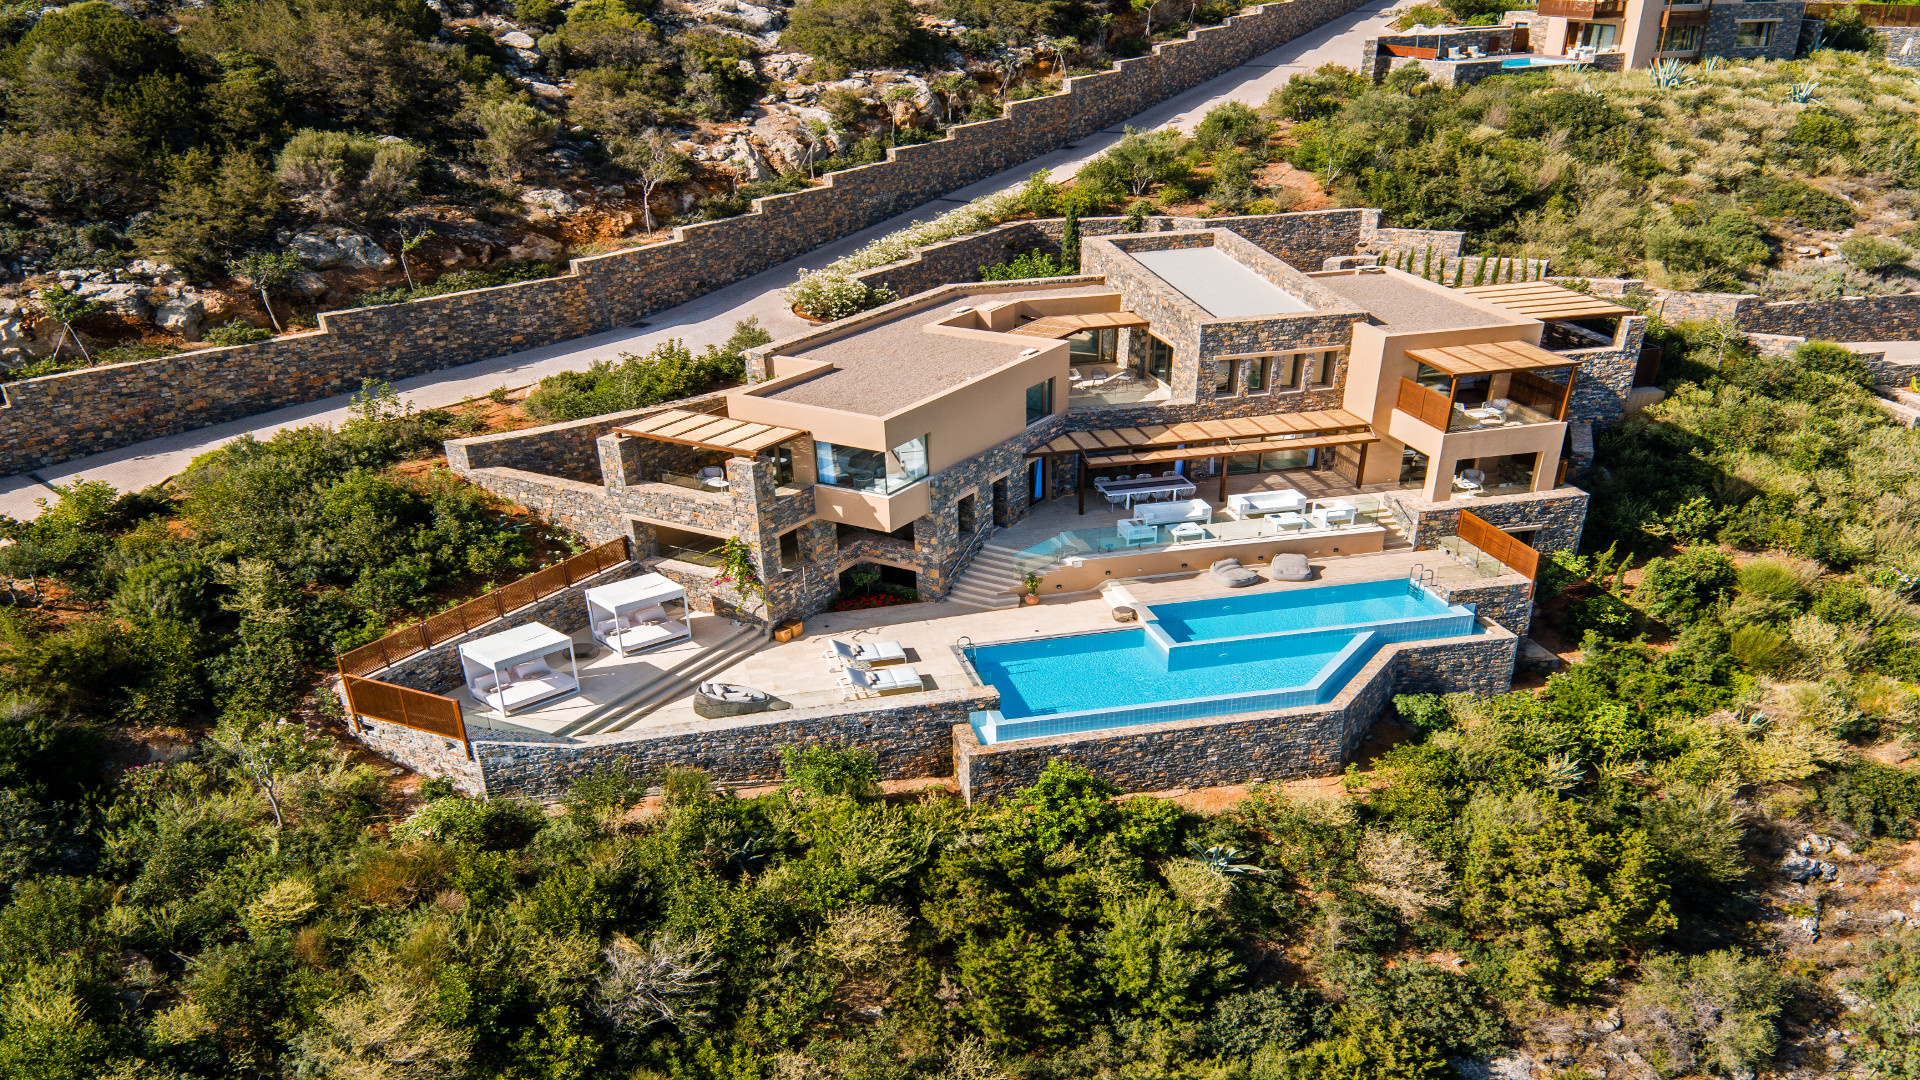 Mansion: Daios Residence, A secluded bay near Agios Nikolaos in Crete, Private villa. 1920x1080 Full HD Background.